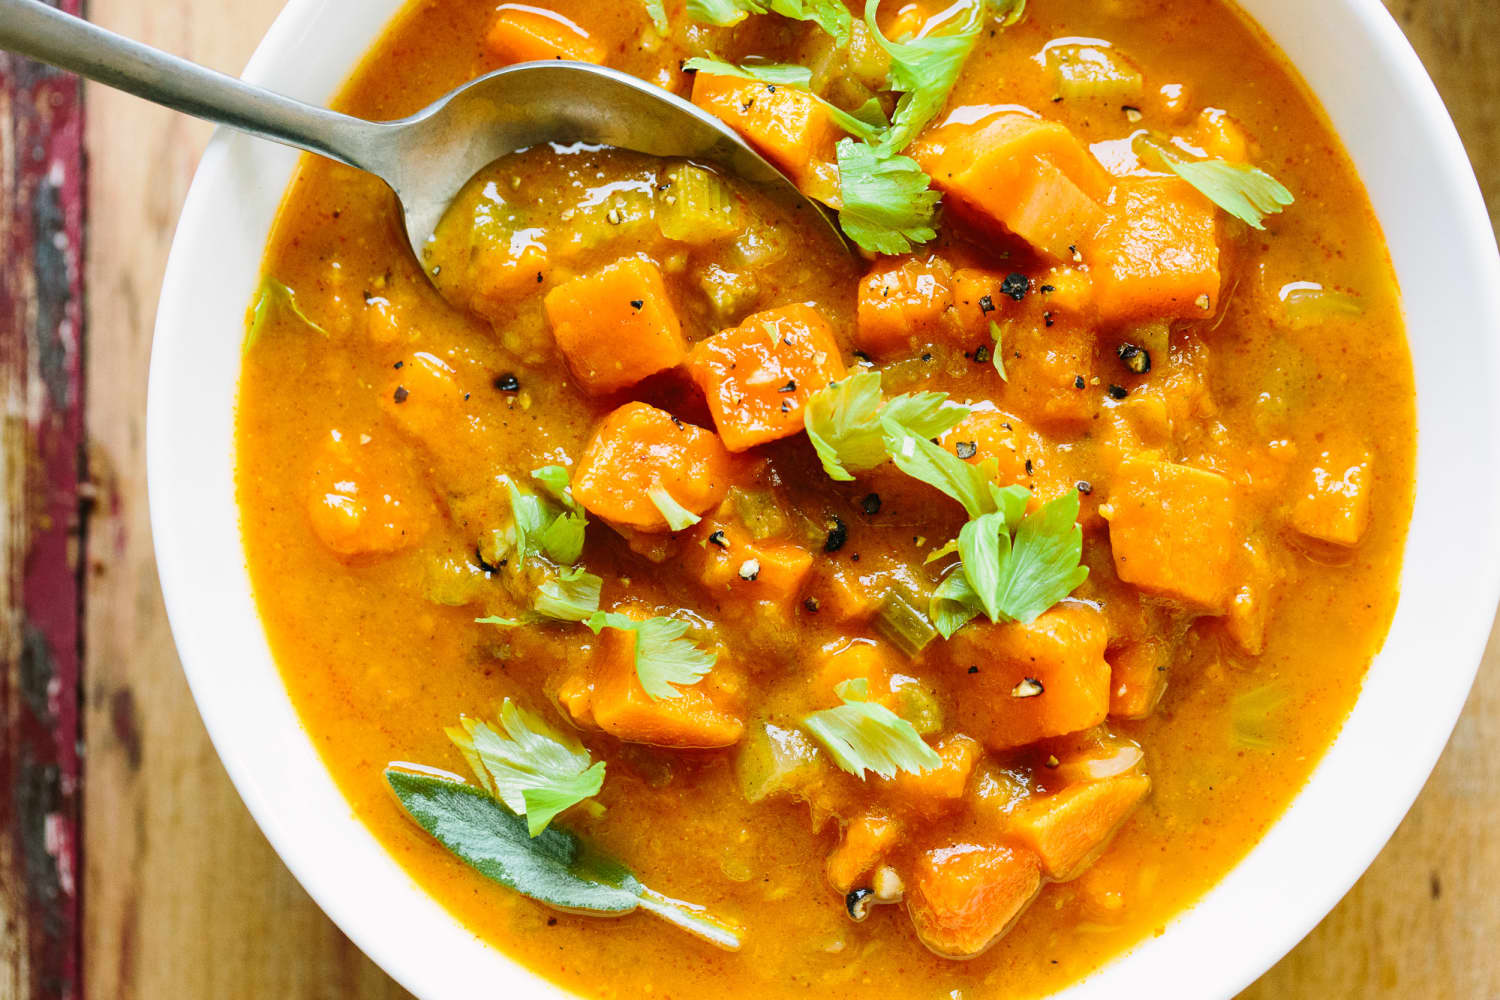 17 of the most delicious vegan recipes